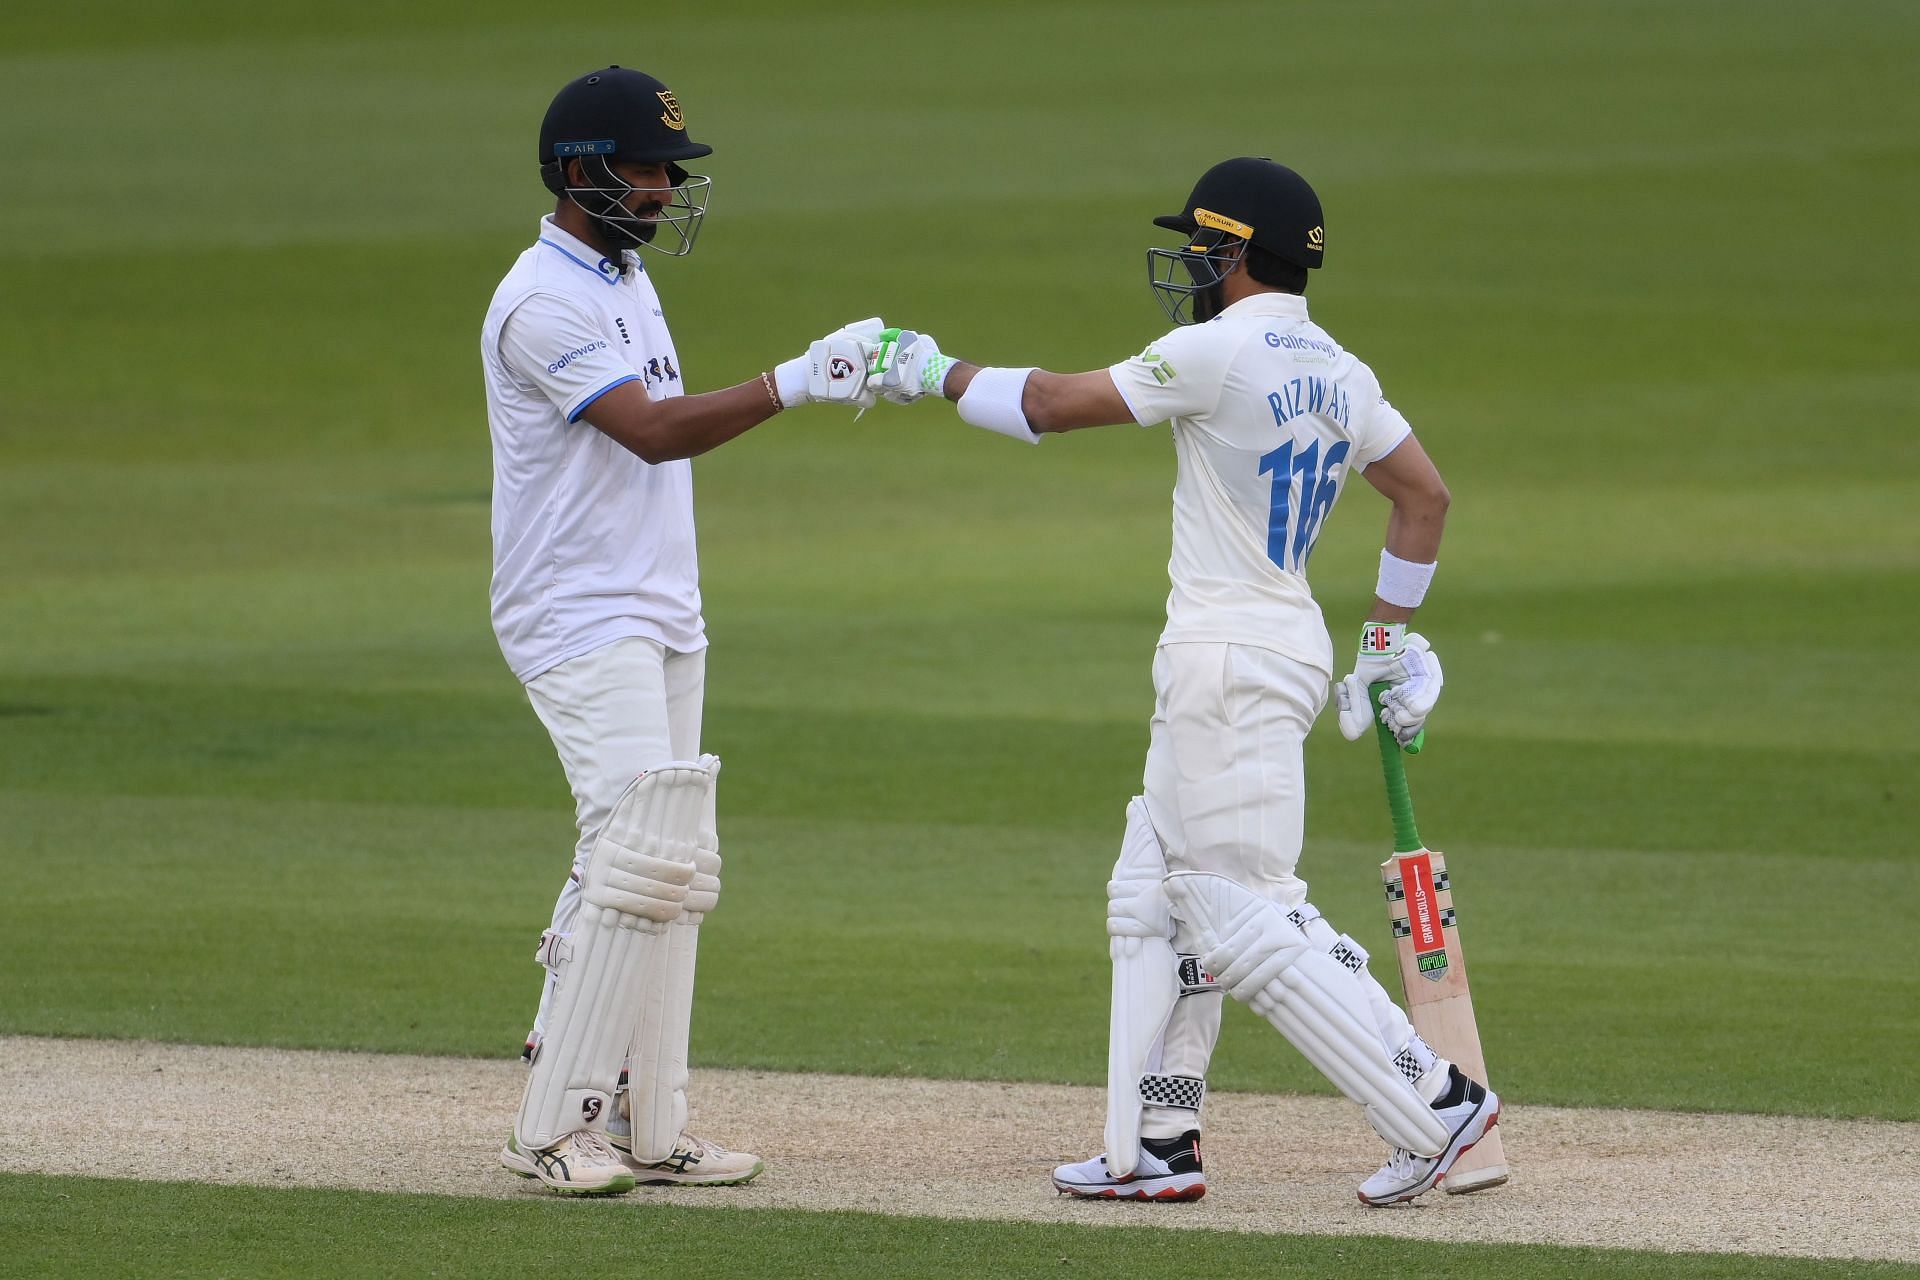 Cheteshwar Pujara batting with Mohammad Rizwan for Sussex in the County Championship. (Credits: Getty)